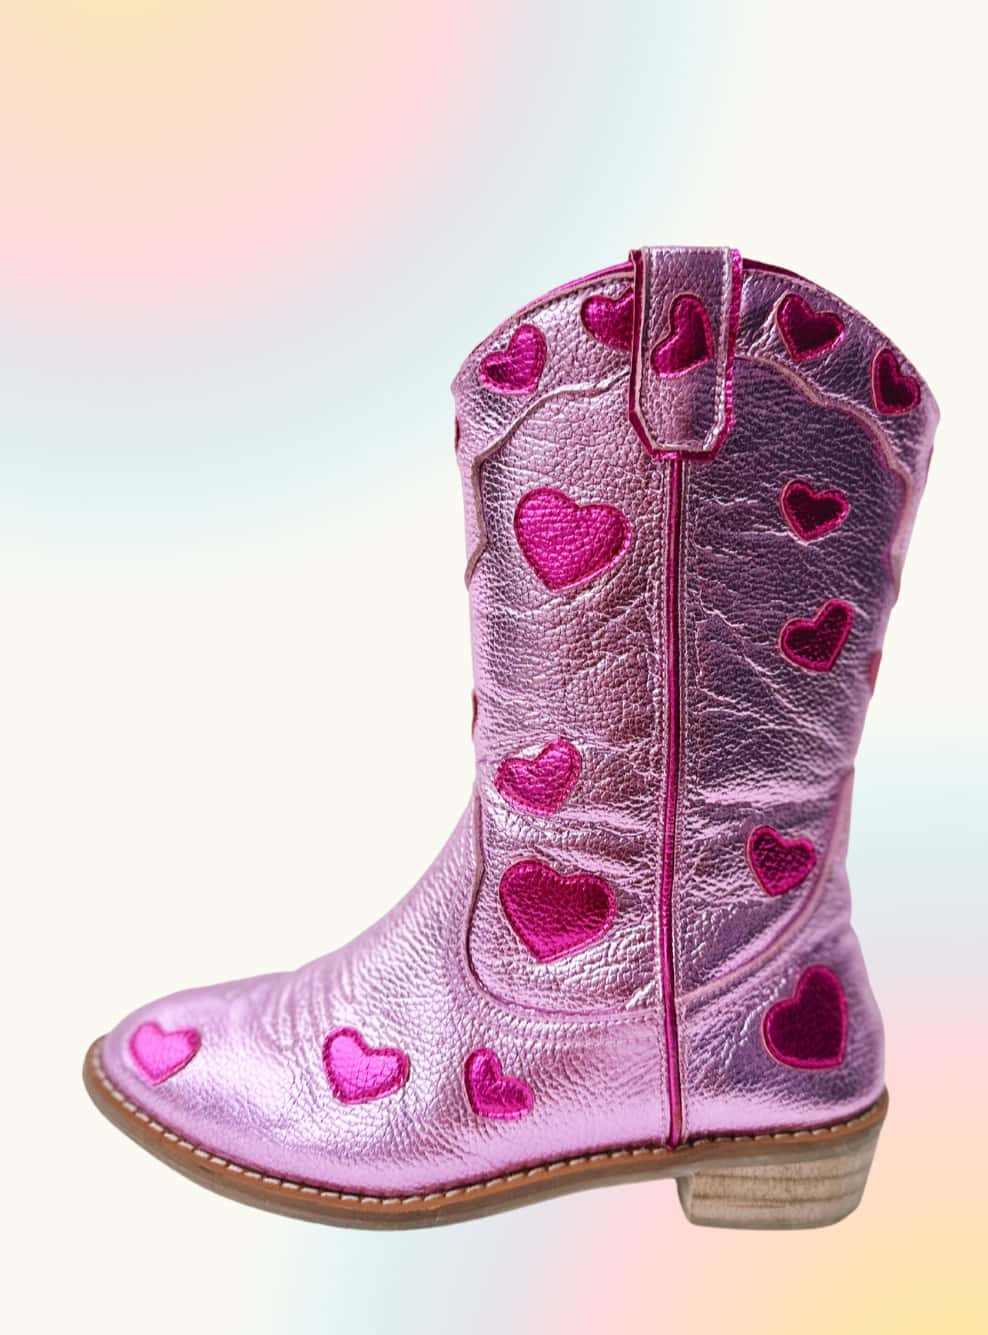 Cowgirl Lovestruck Boots